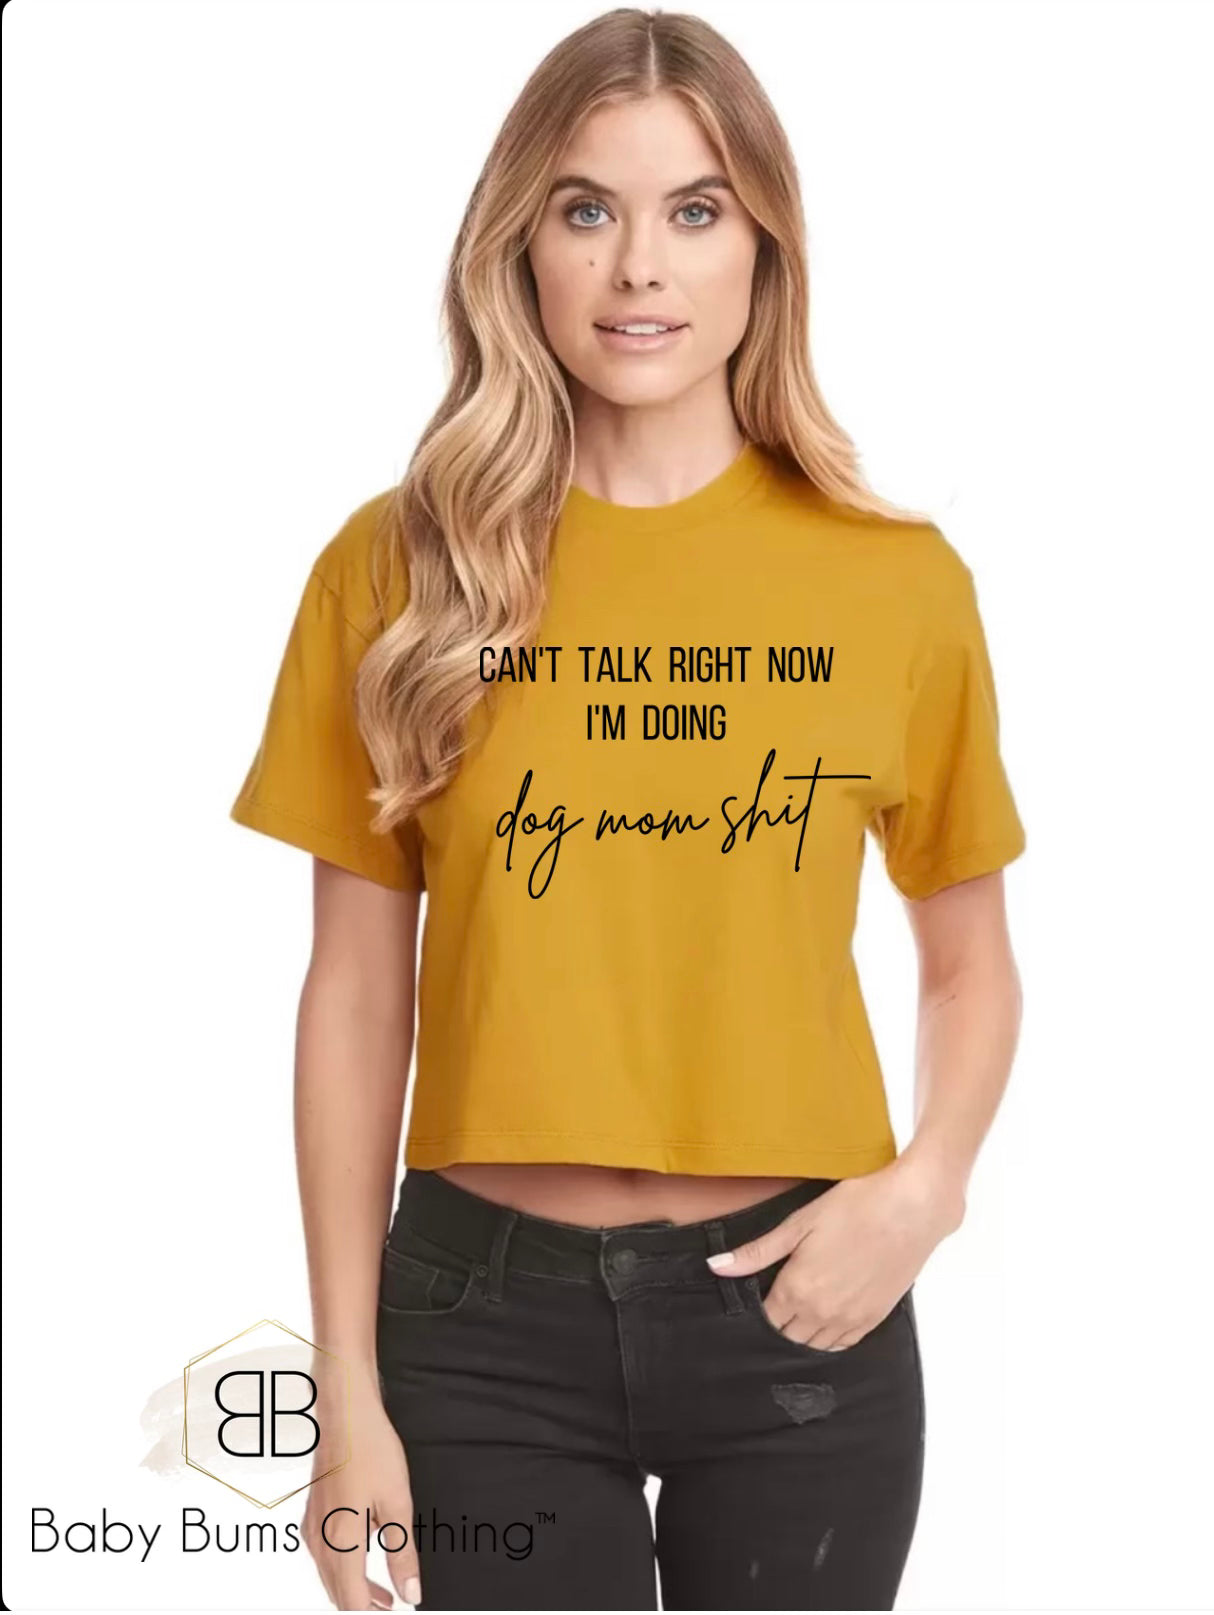 RTS ADULT LARGE CROP TOP CANT TALK RIGHT NOW - Baby Bums Clothing 